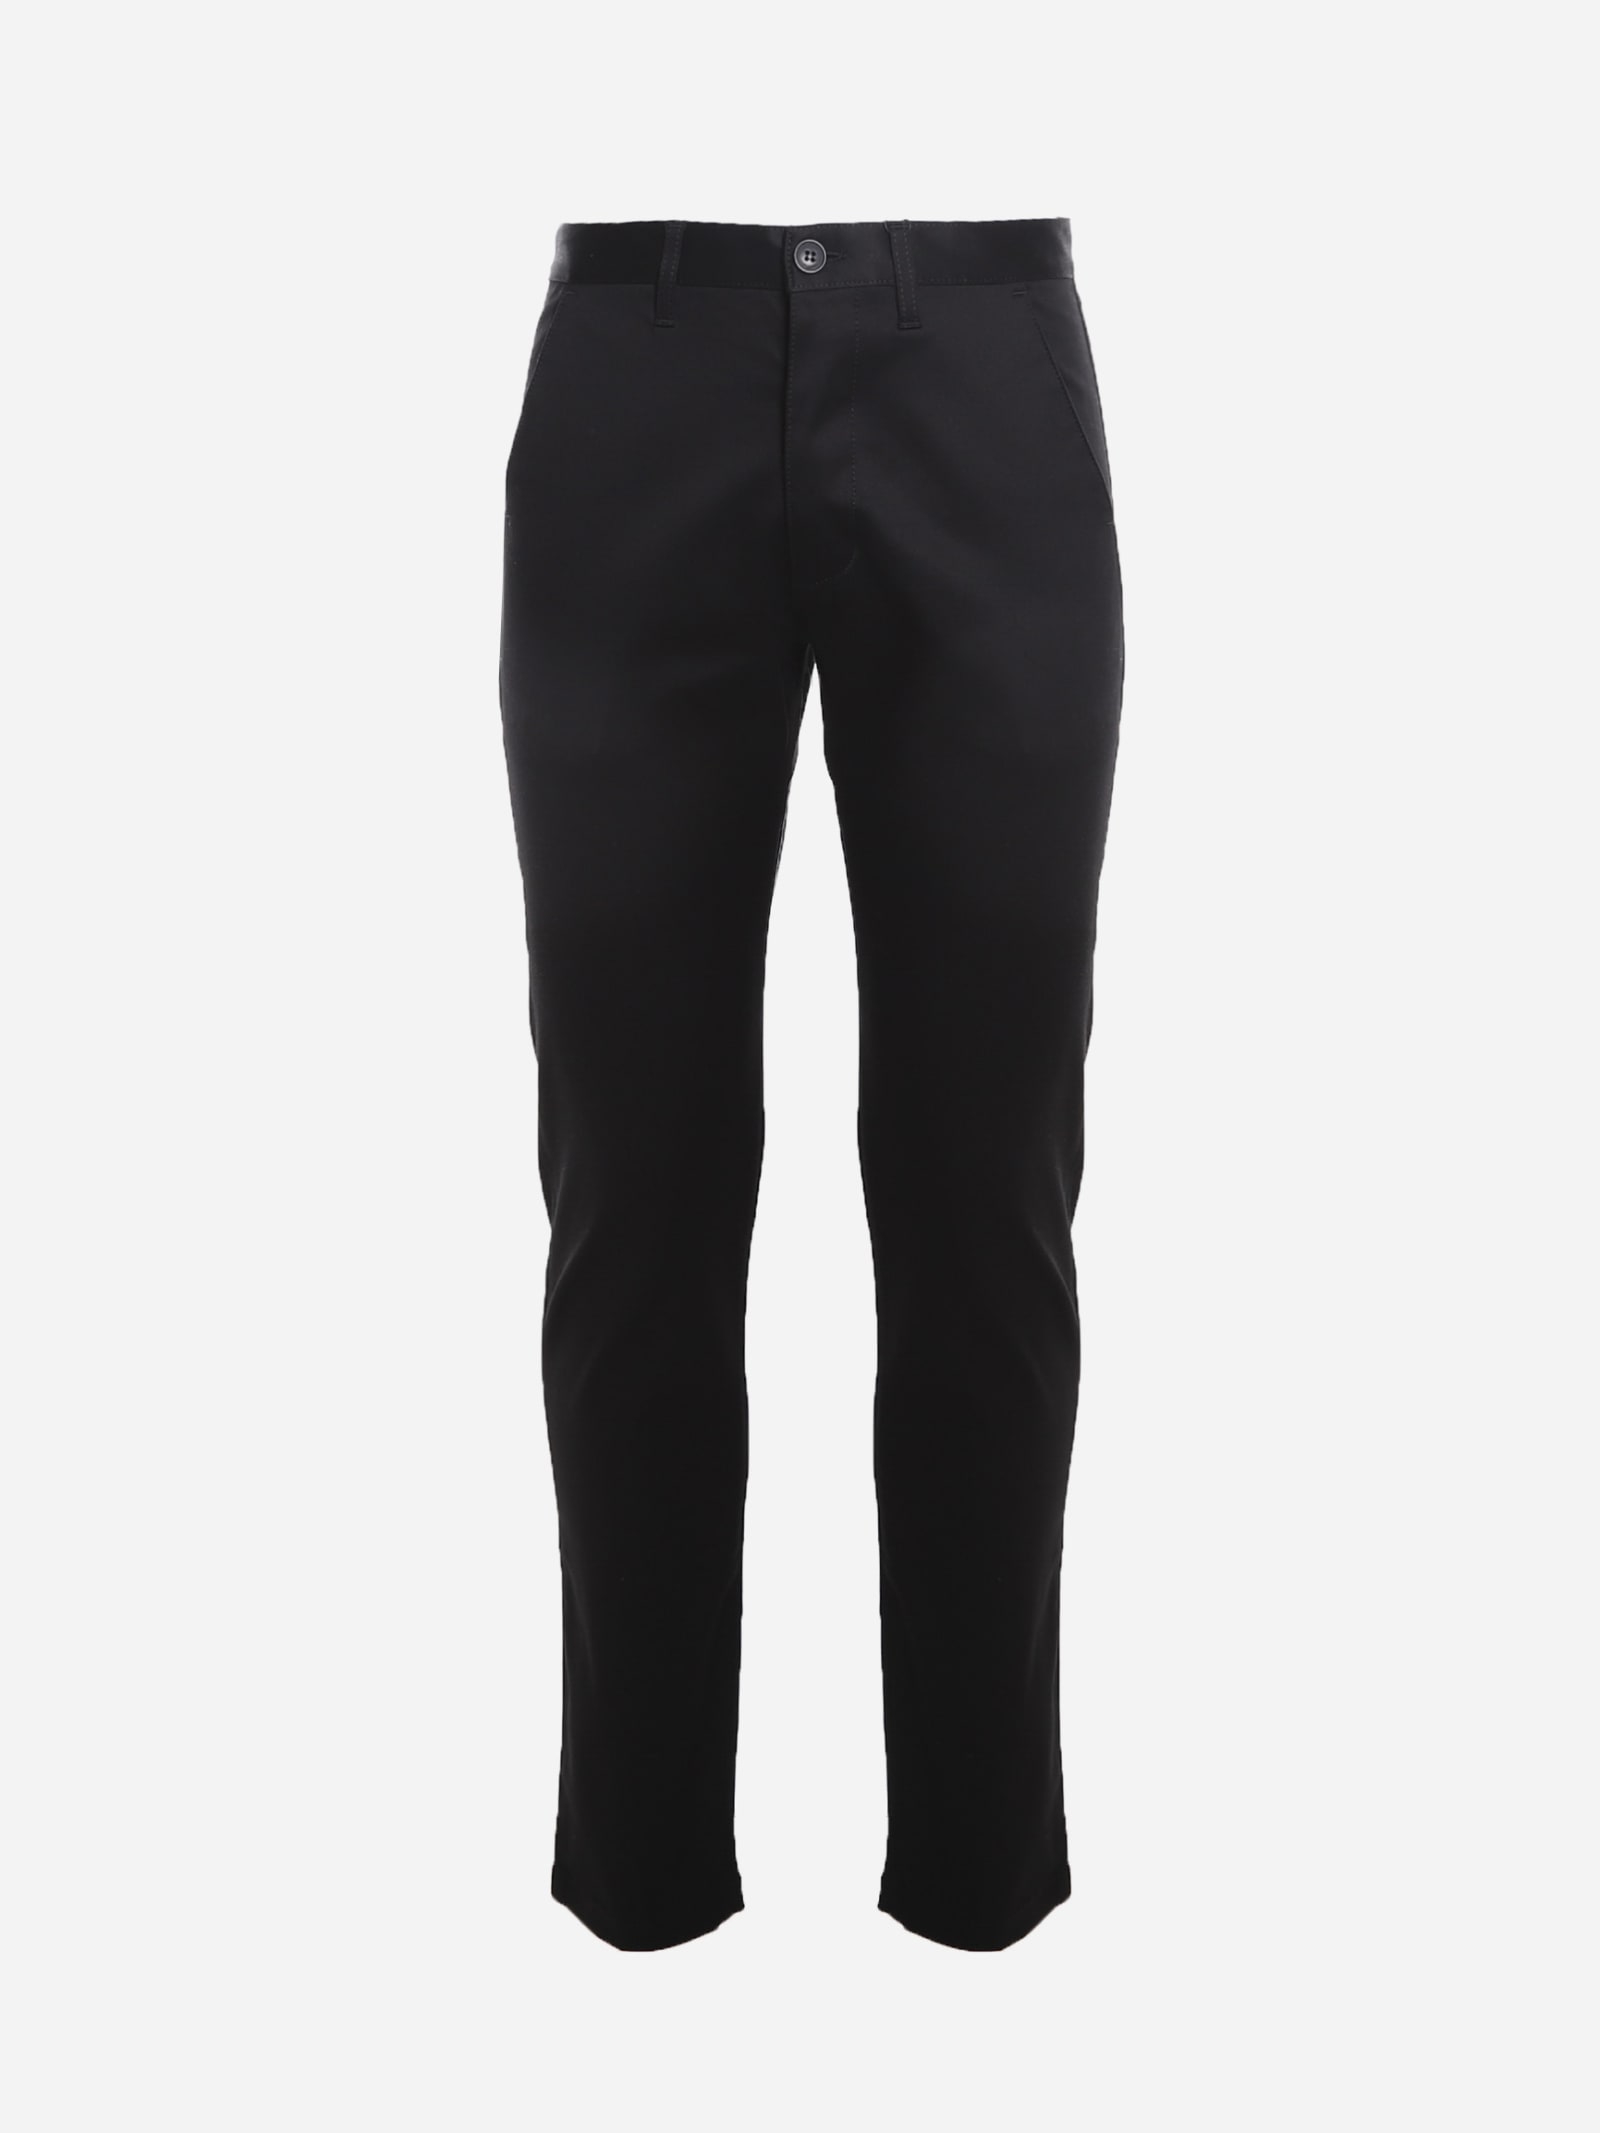 Saint Laurent Chino Pants Made Of Stretch Cotton